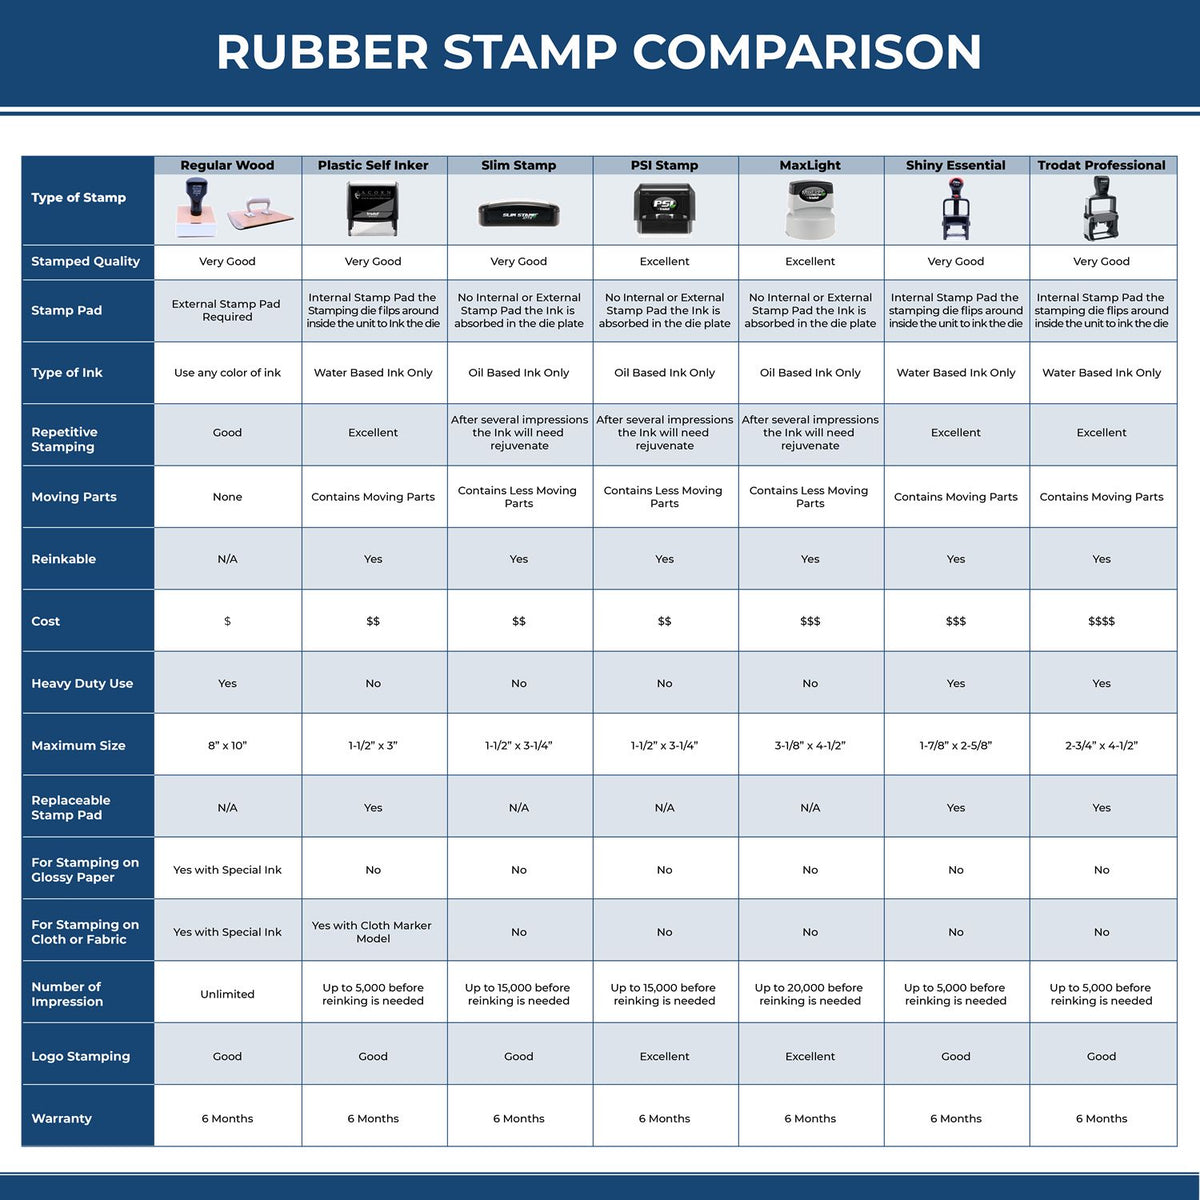 A comparison chart for the different types of mount models available for the Heavy-Duty Colorado Rectangular Notary Stamp.